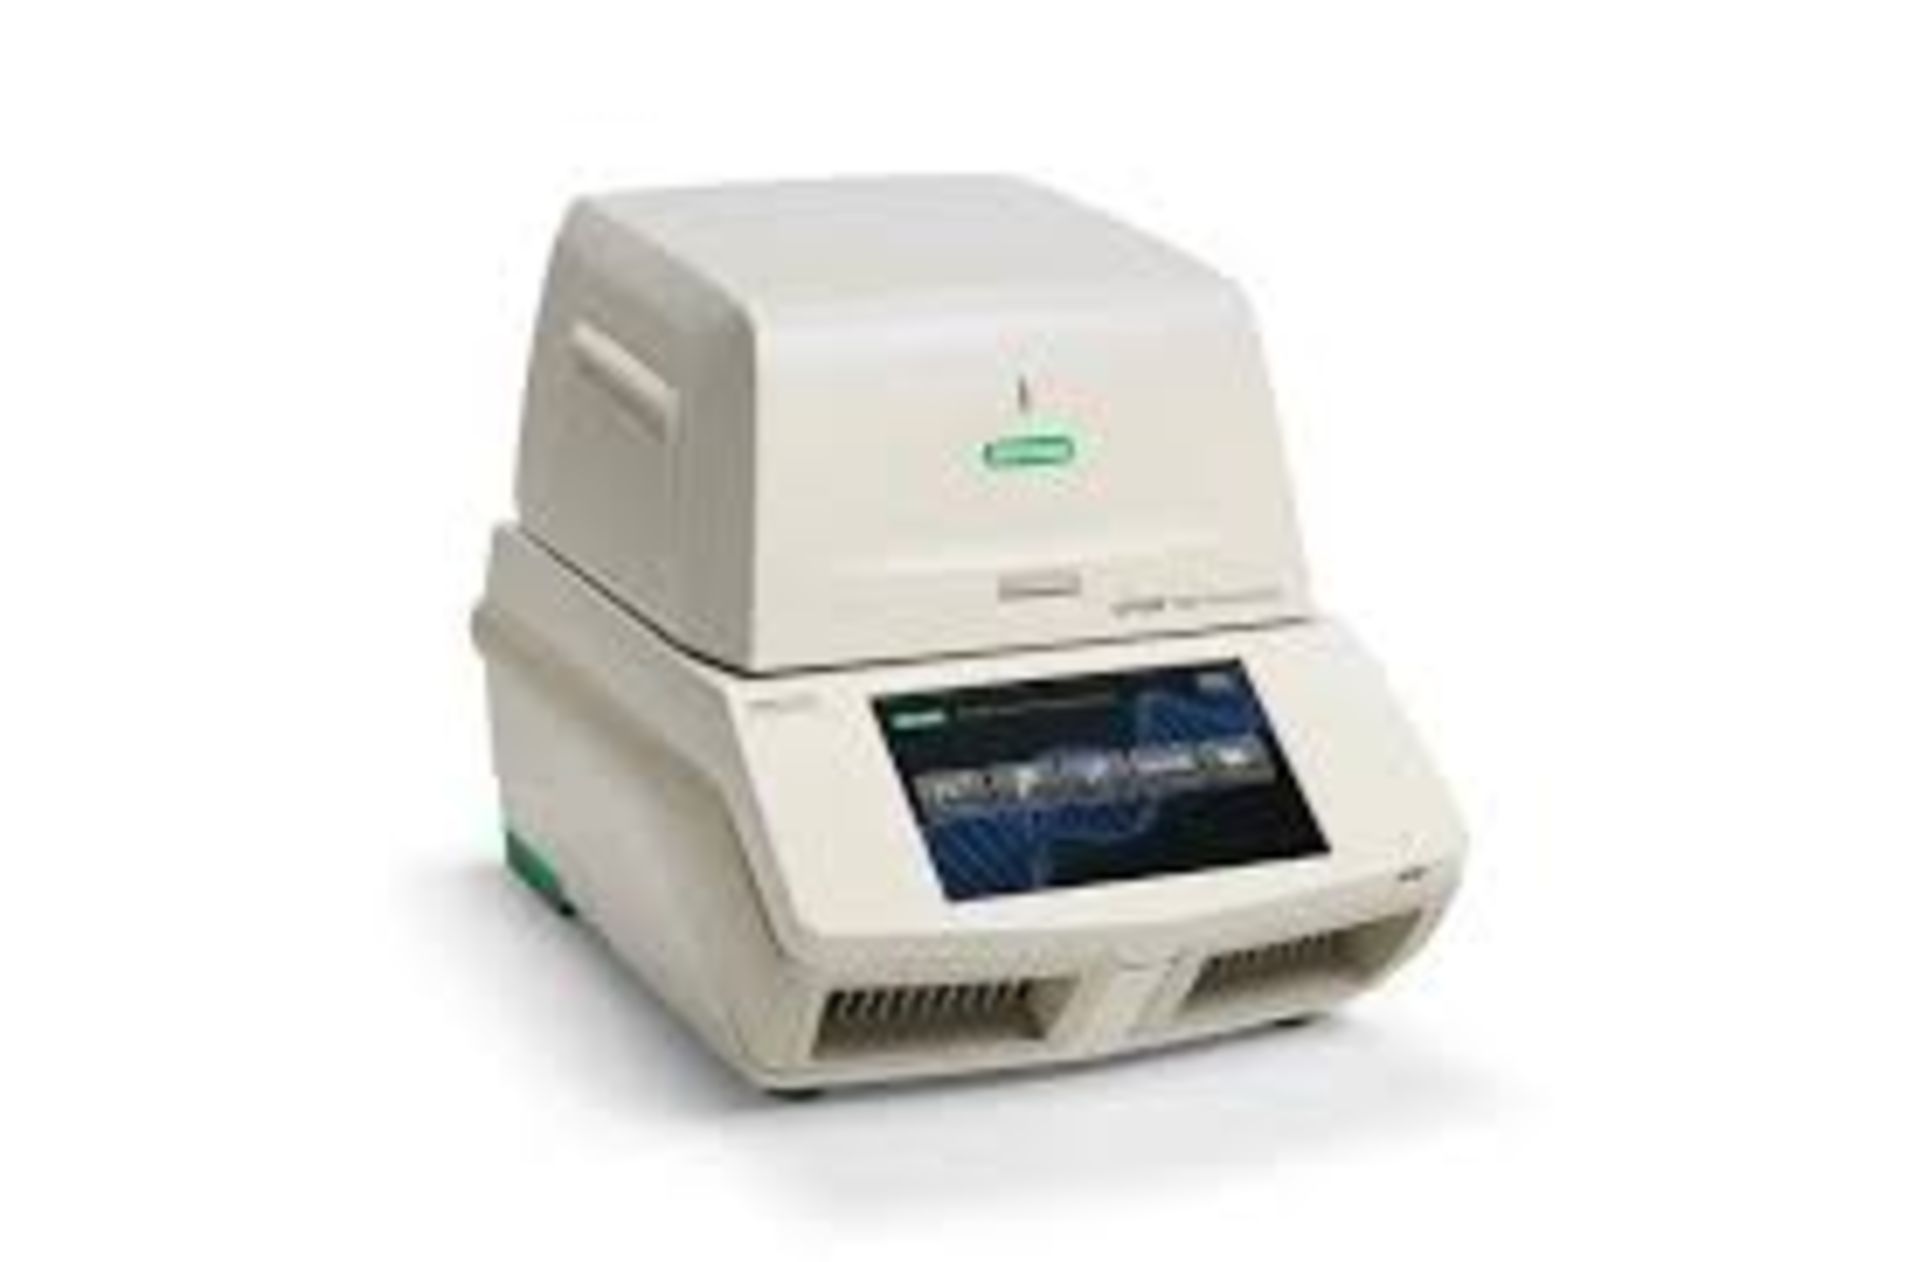 CFX96 Touch Real-Time PCR Detection System. Never Been Used. Price new 35k The CFX96 Touch System is